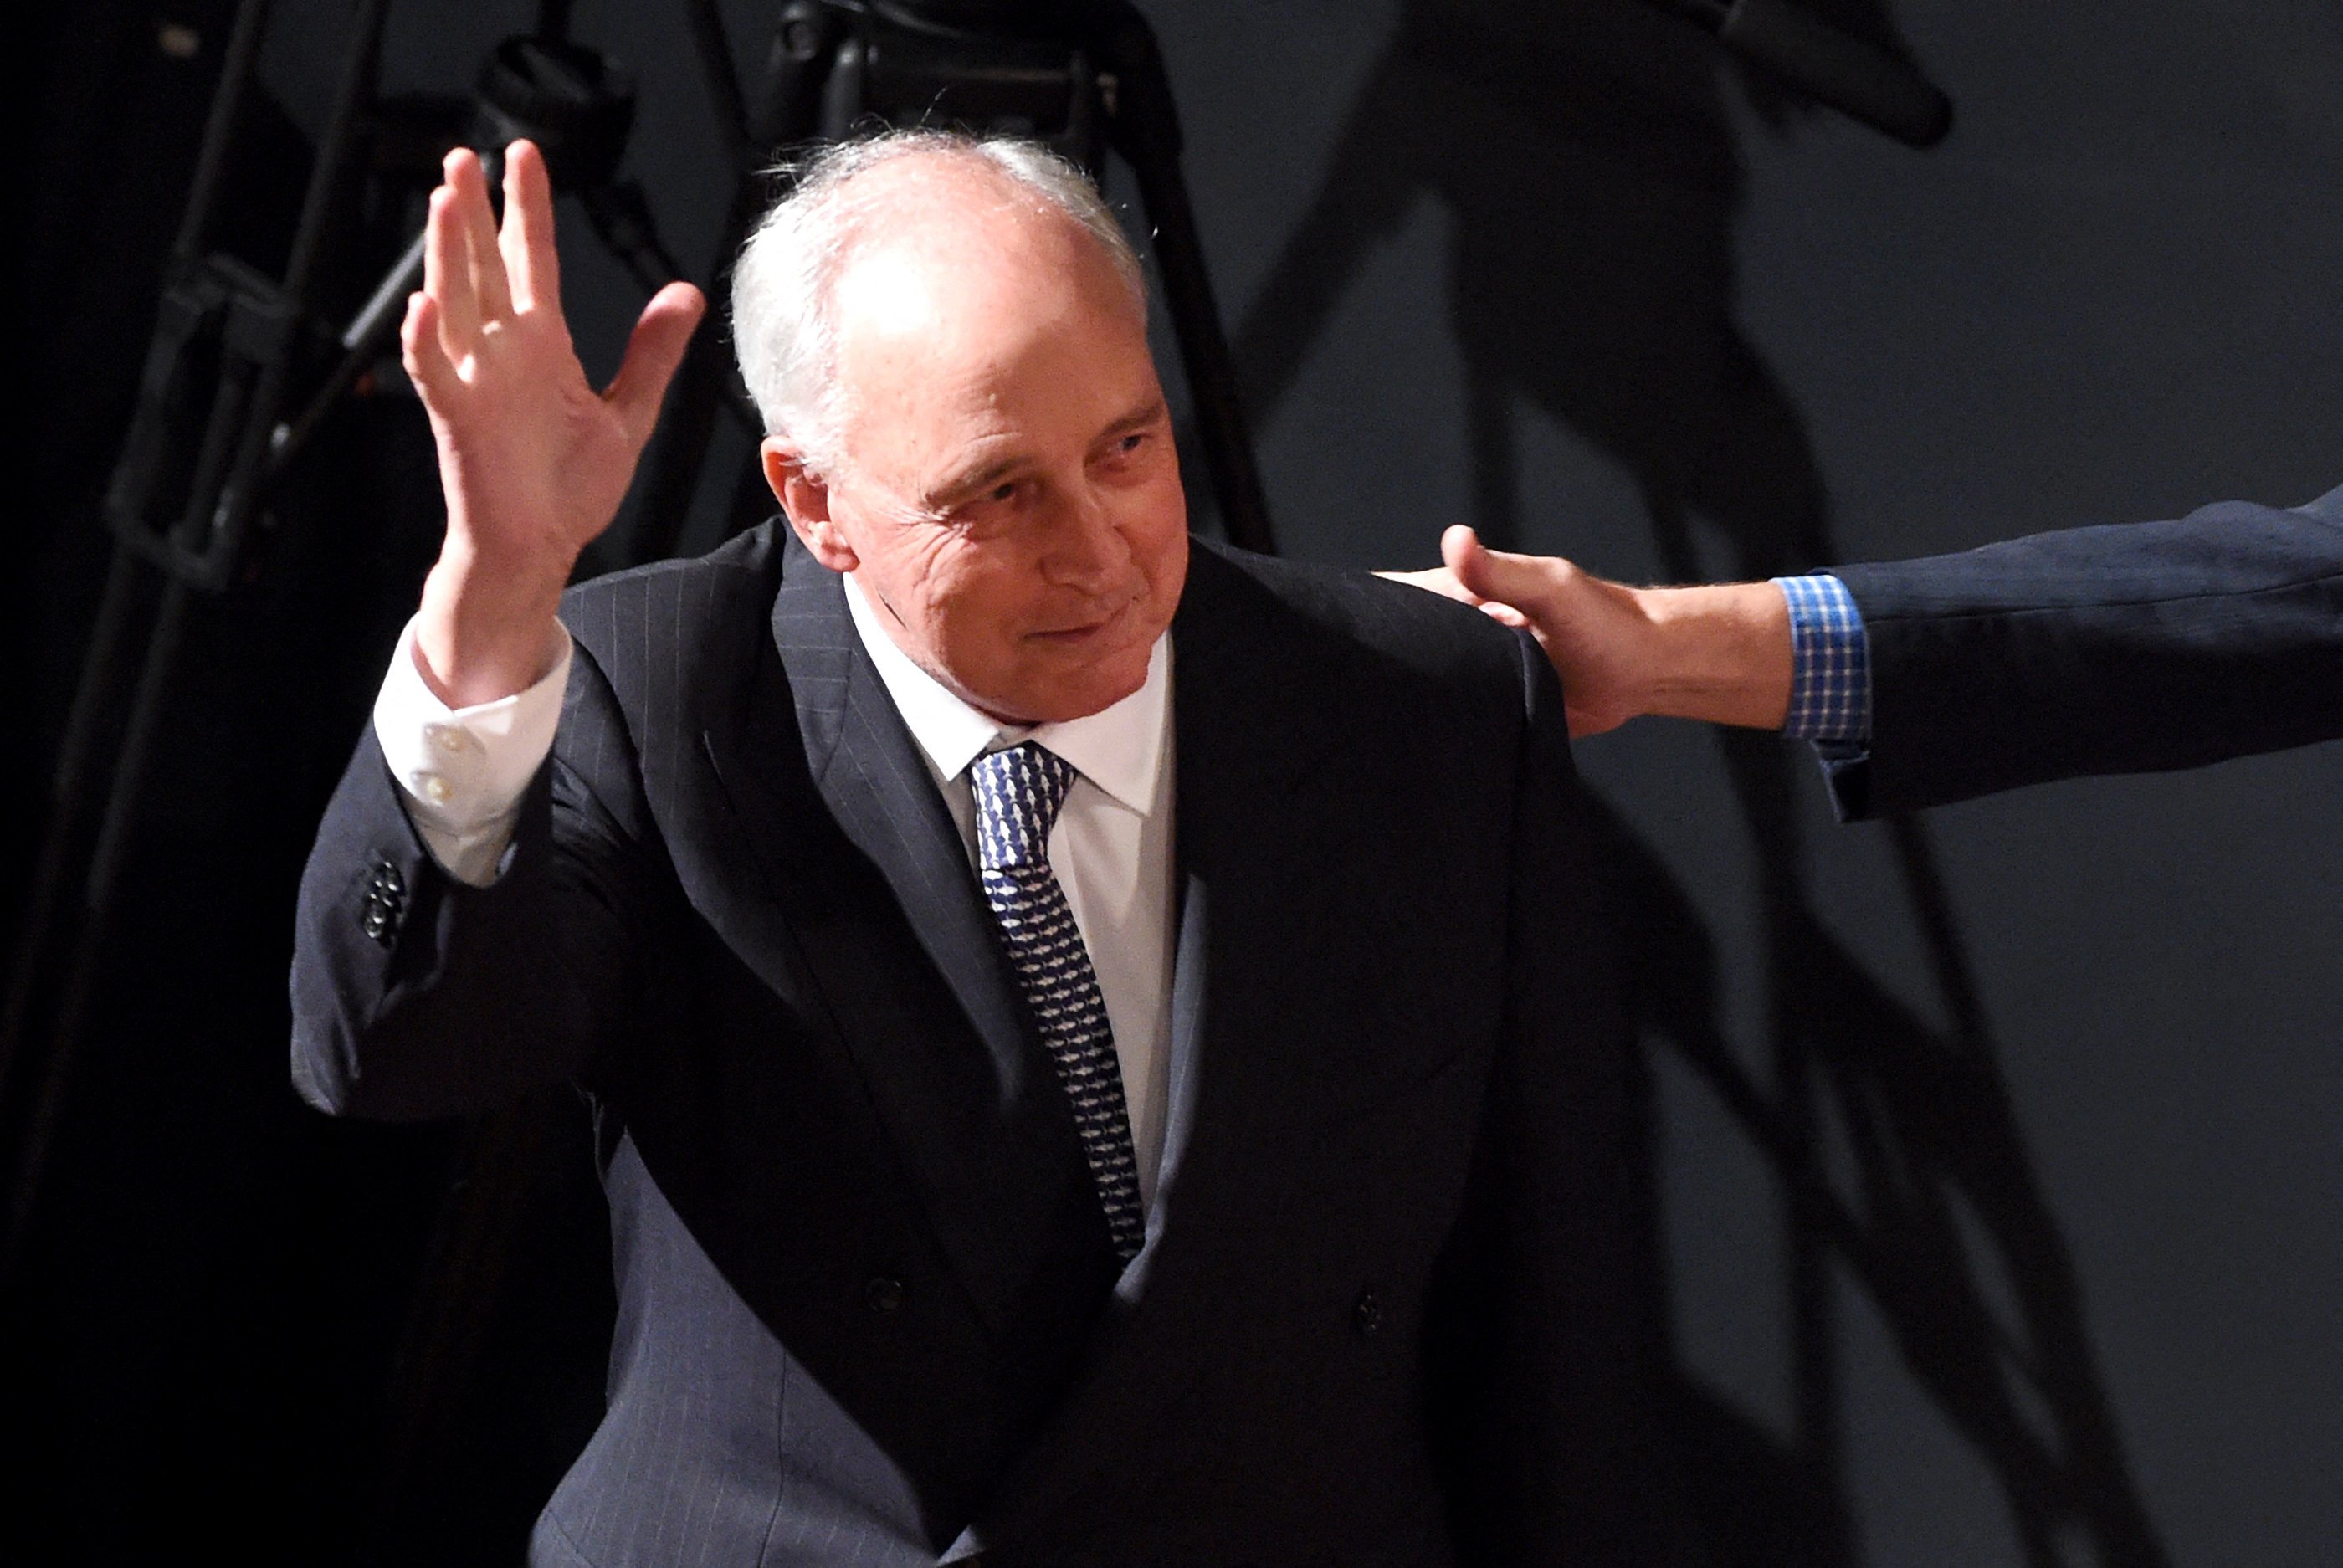 Former Australian prime minister Paul Keating says Canberra’s policy is “at odds with the general tenor of Asean’s perceived strategic interests”. Photo: AFP